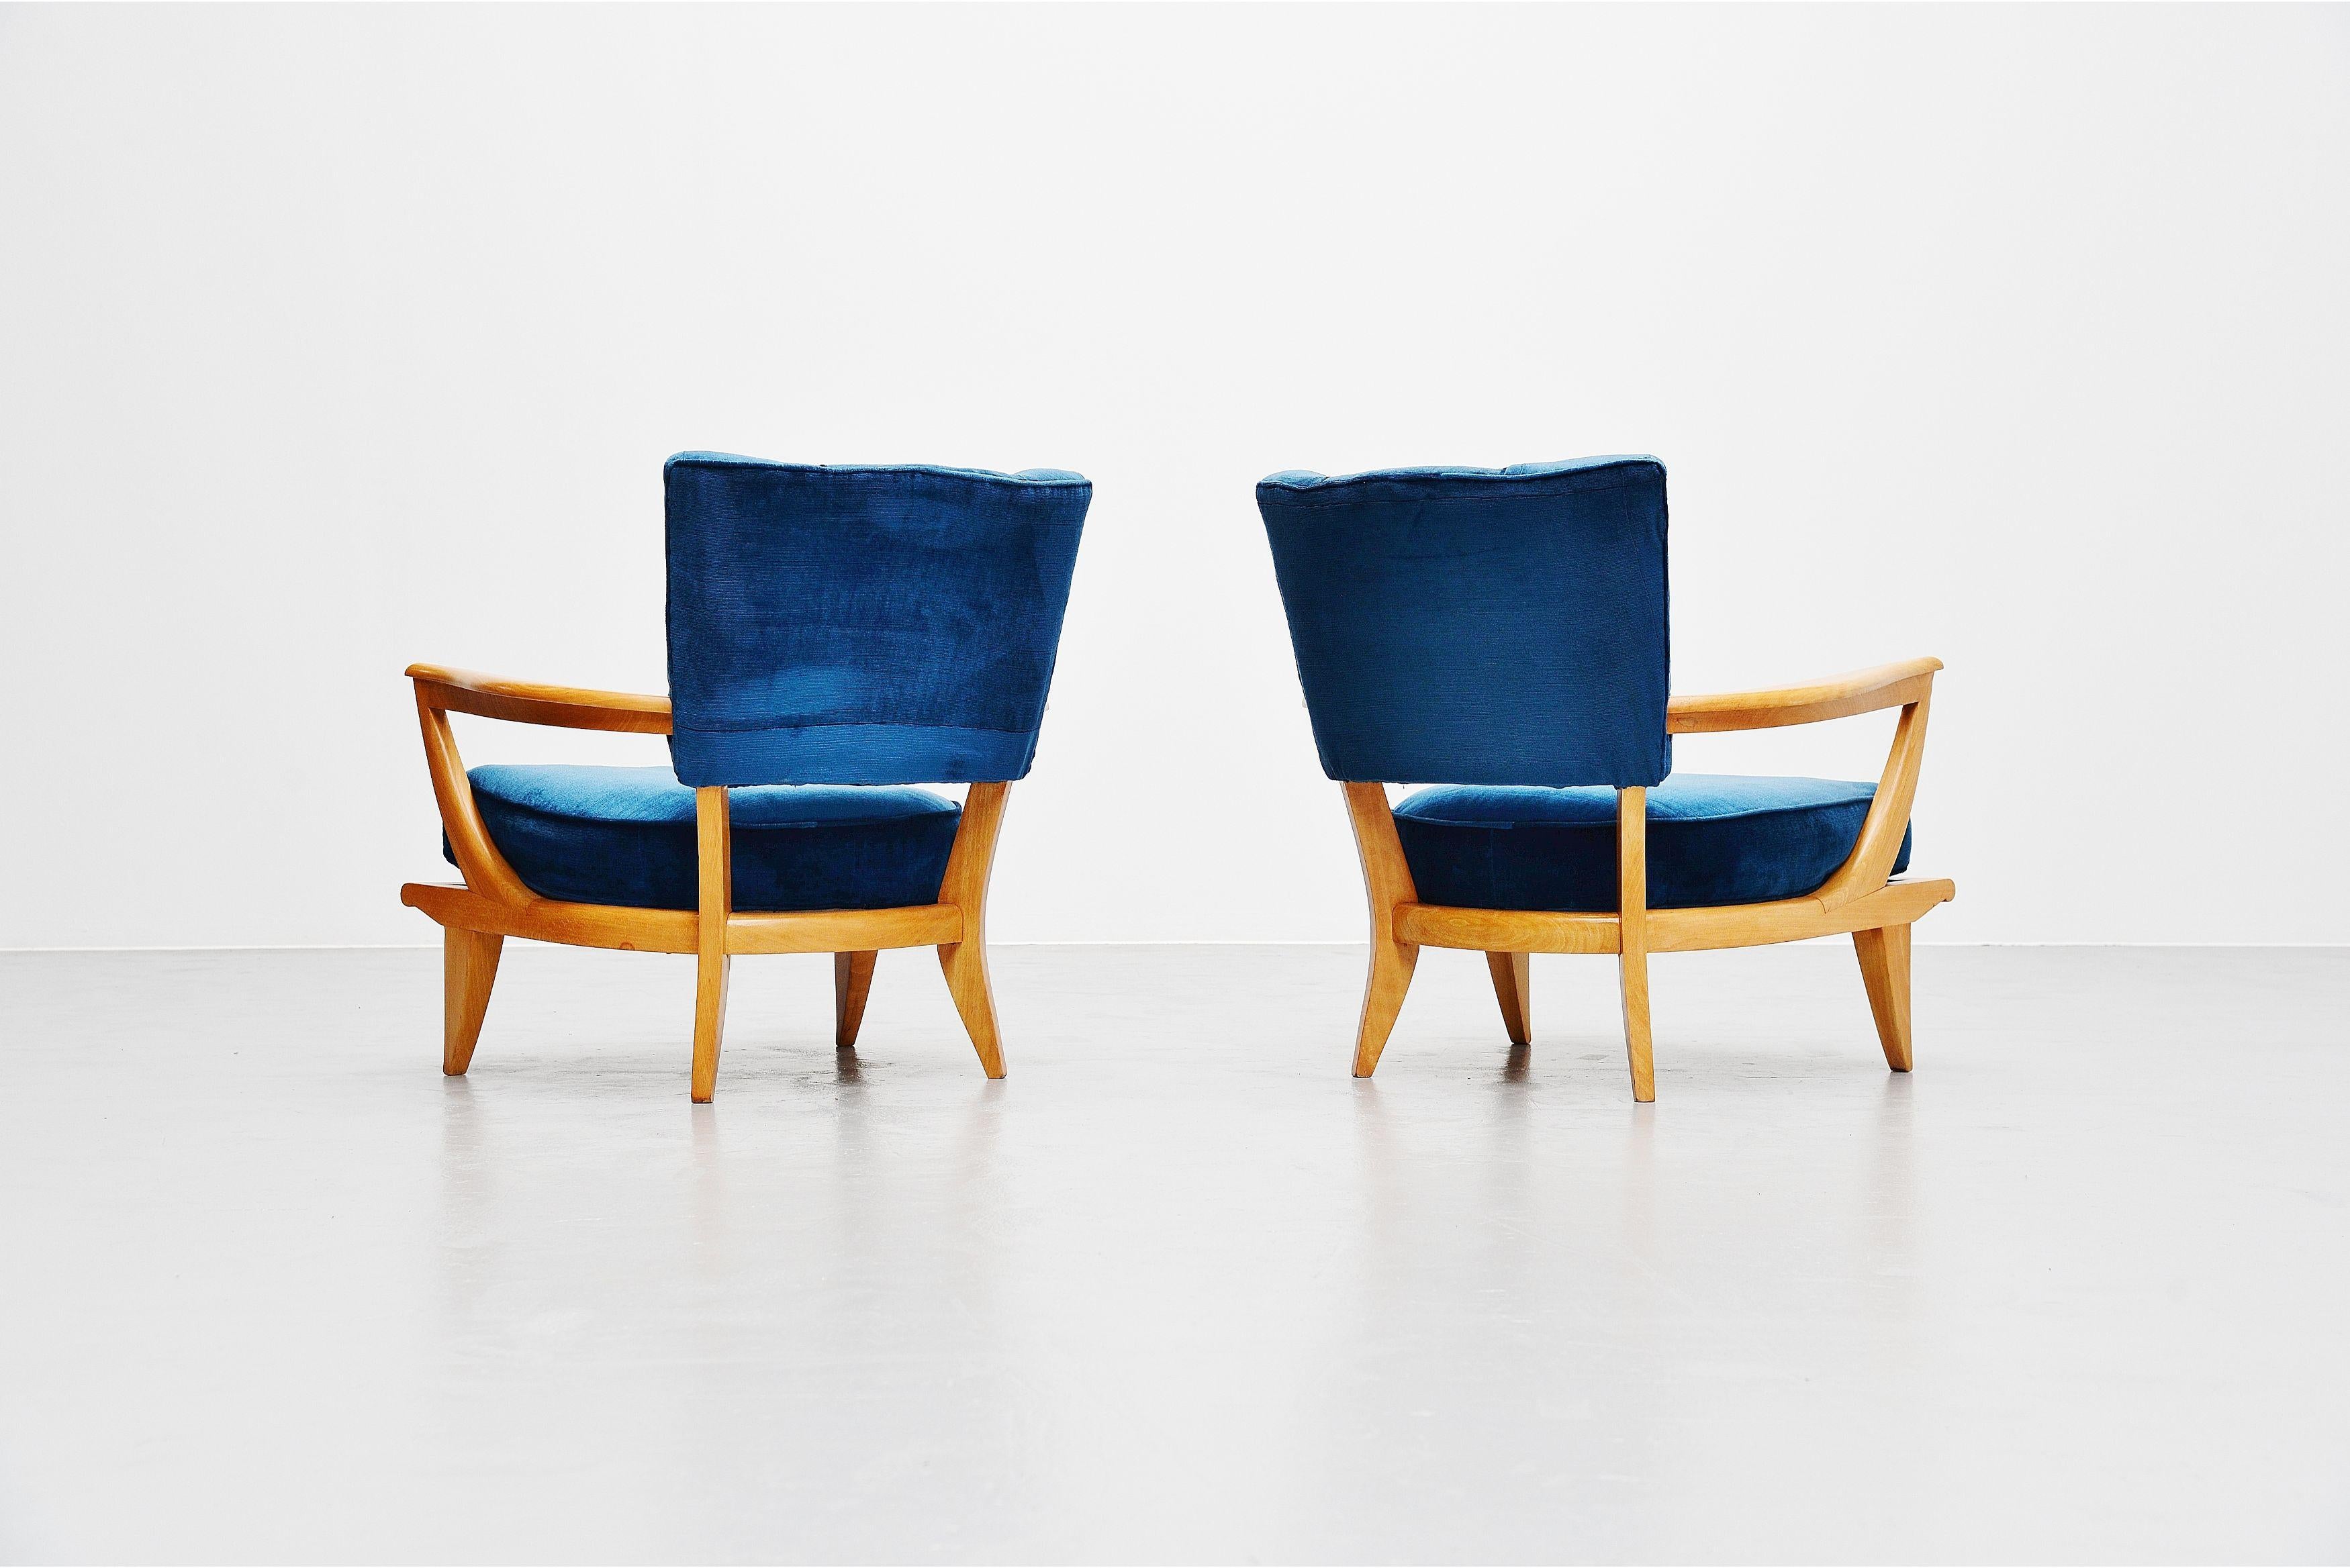 Stunning pair of low lounge chairs model SK40 designed by Etienne-Henri Martin and manufactured by Steiner, France 1952. These chairs have a solid beech frame which is fully refinished and in excellent condition. They also still have their original